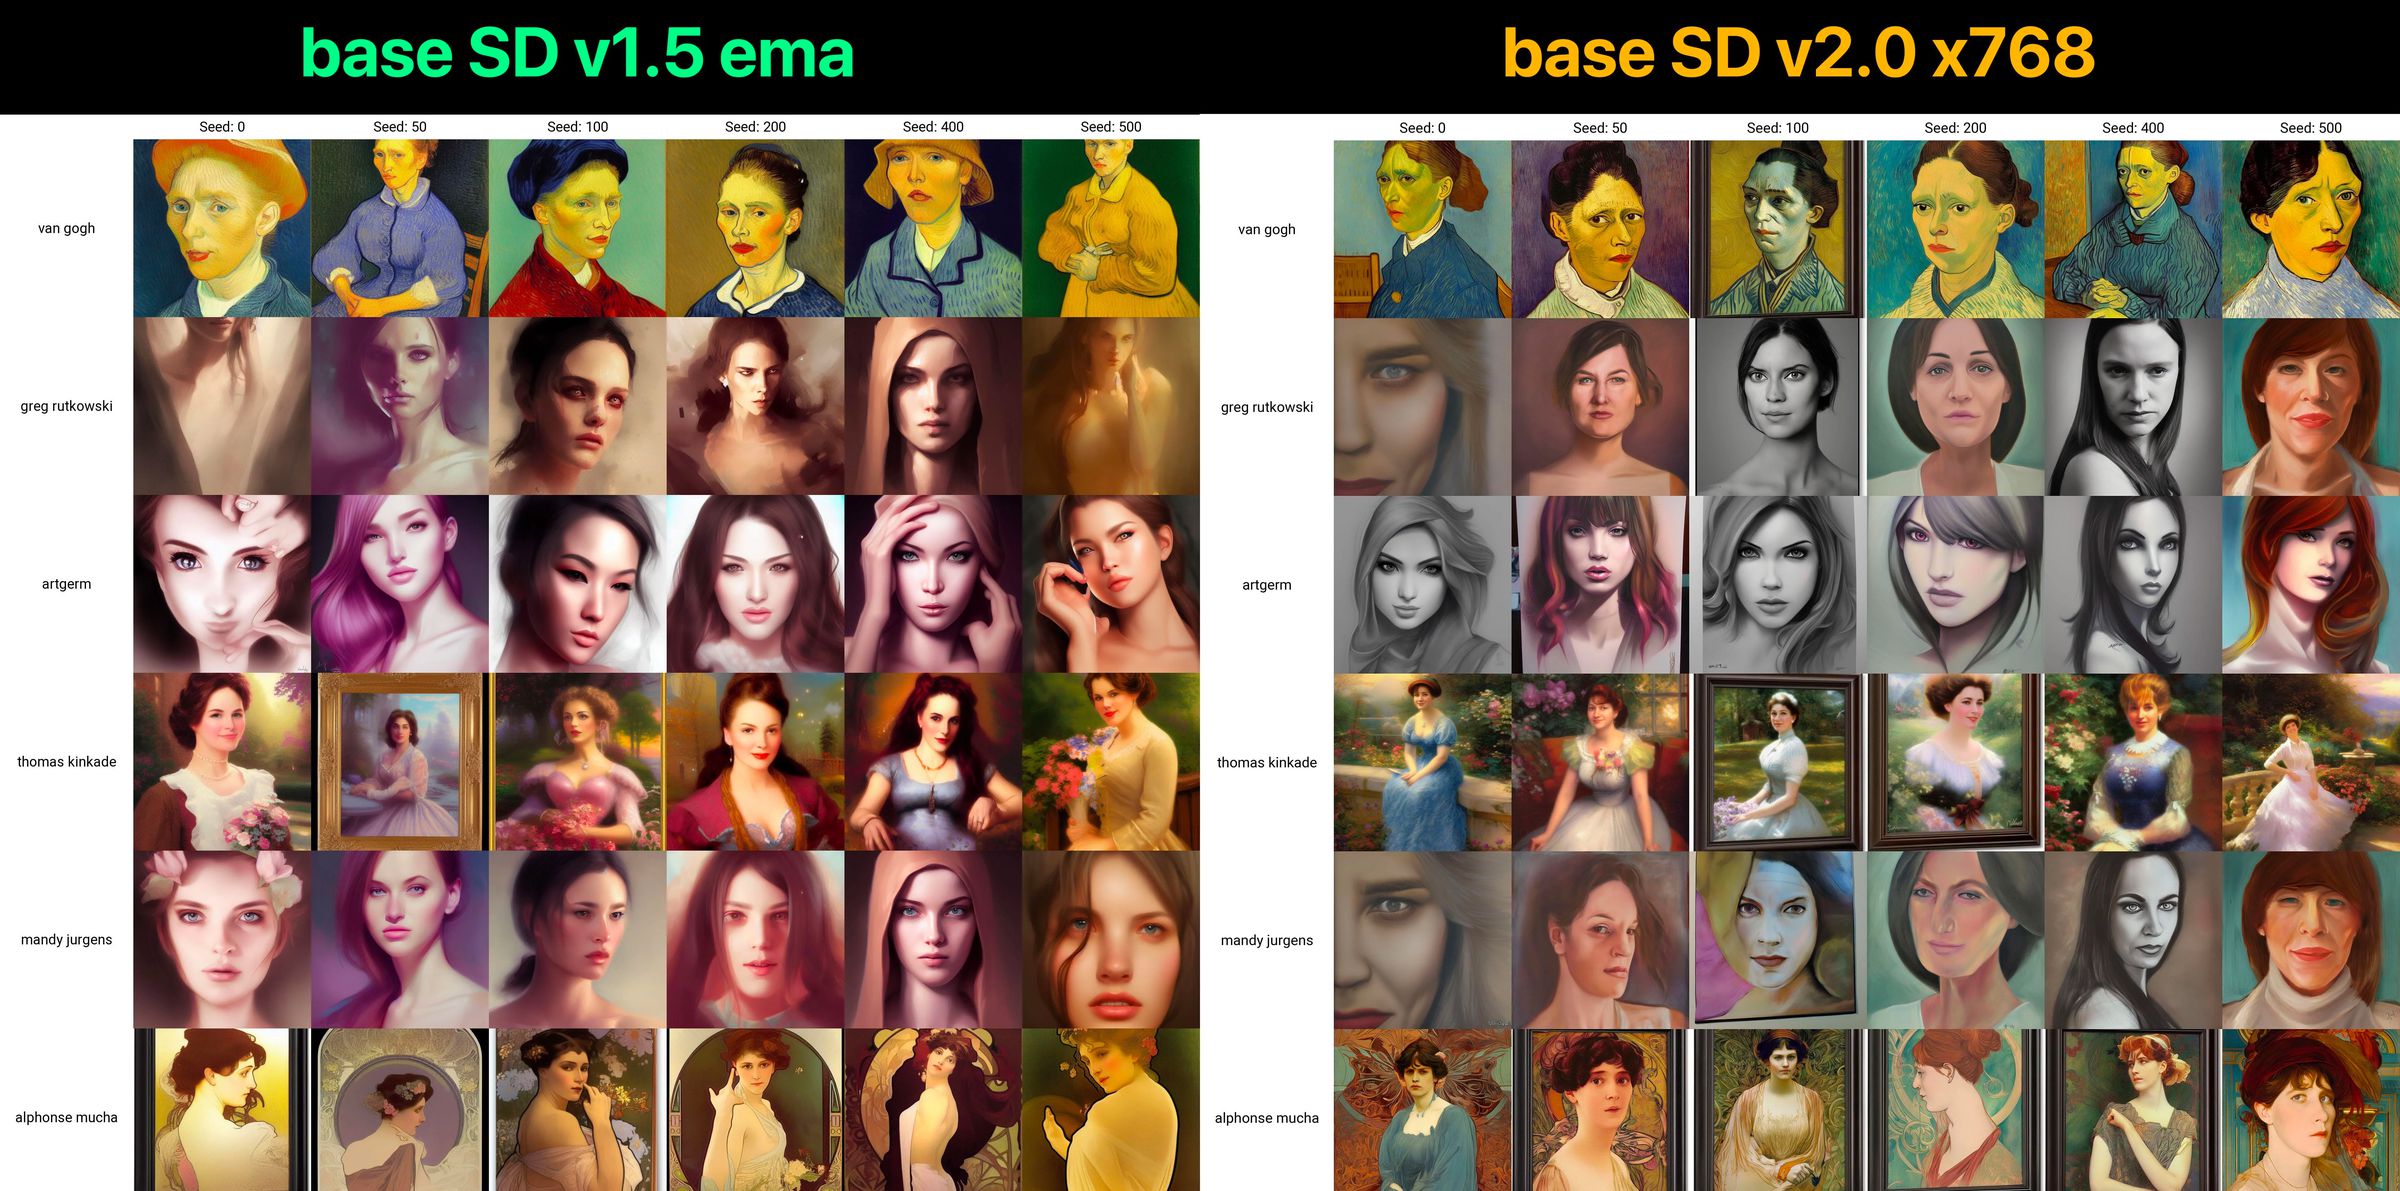 A grid of images showing side-by-side comparisons of AI-generated artworks created with different versions of Stable Diffuse.